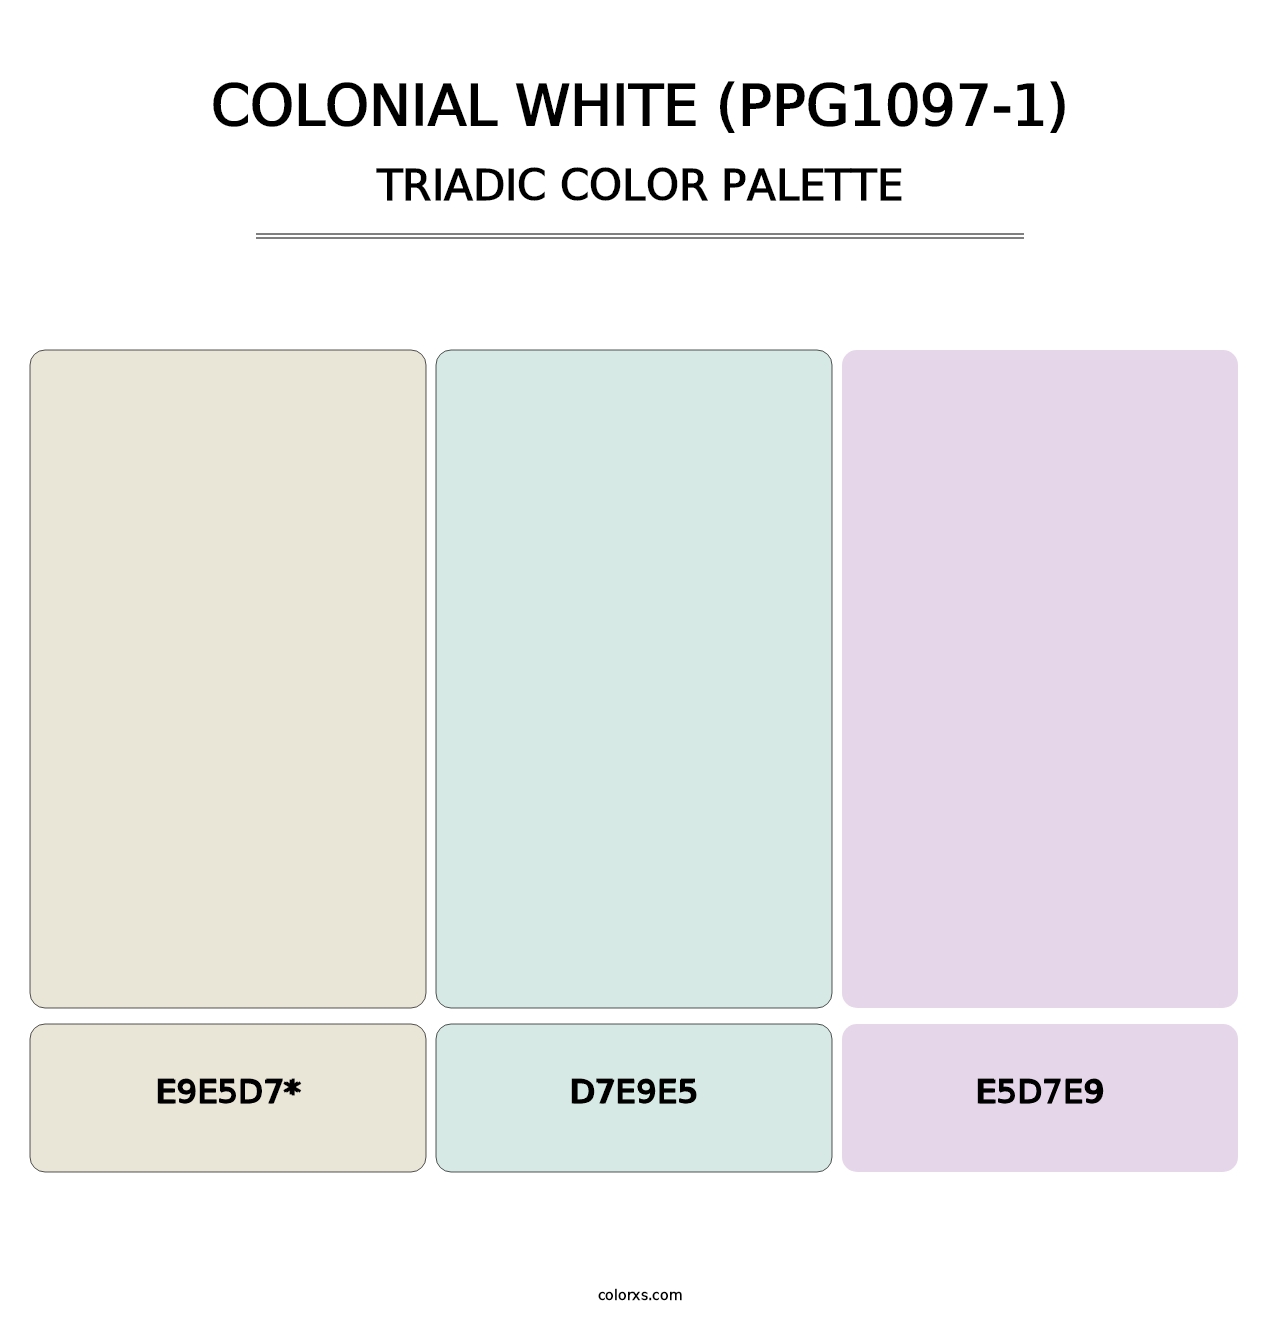 Colonial White (PPG1097-1) - Triadic Color Palette